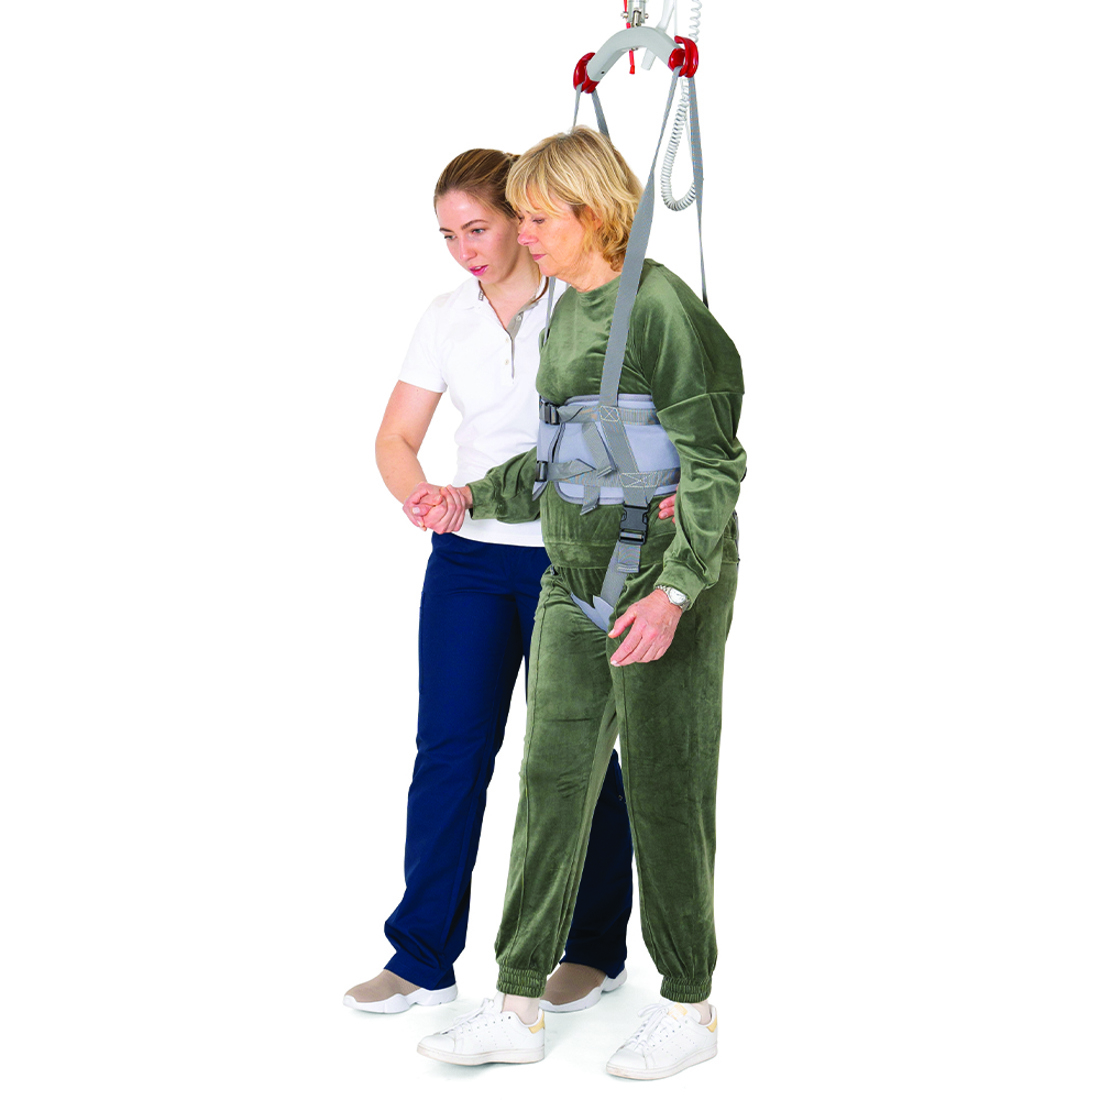 Molift UnoSling Ambulating Vest Carere and patent walking sideview.jpg